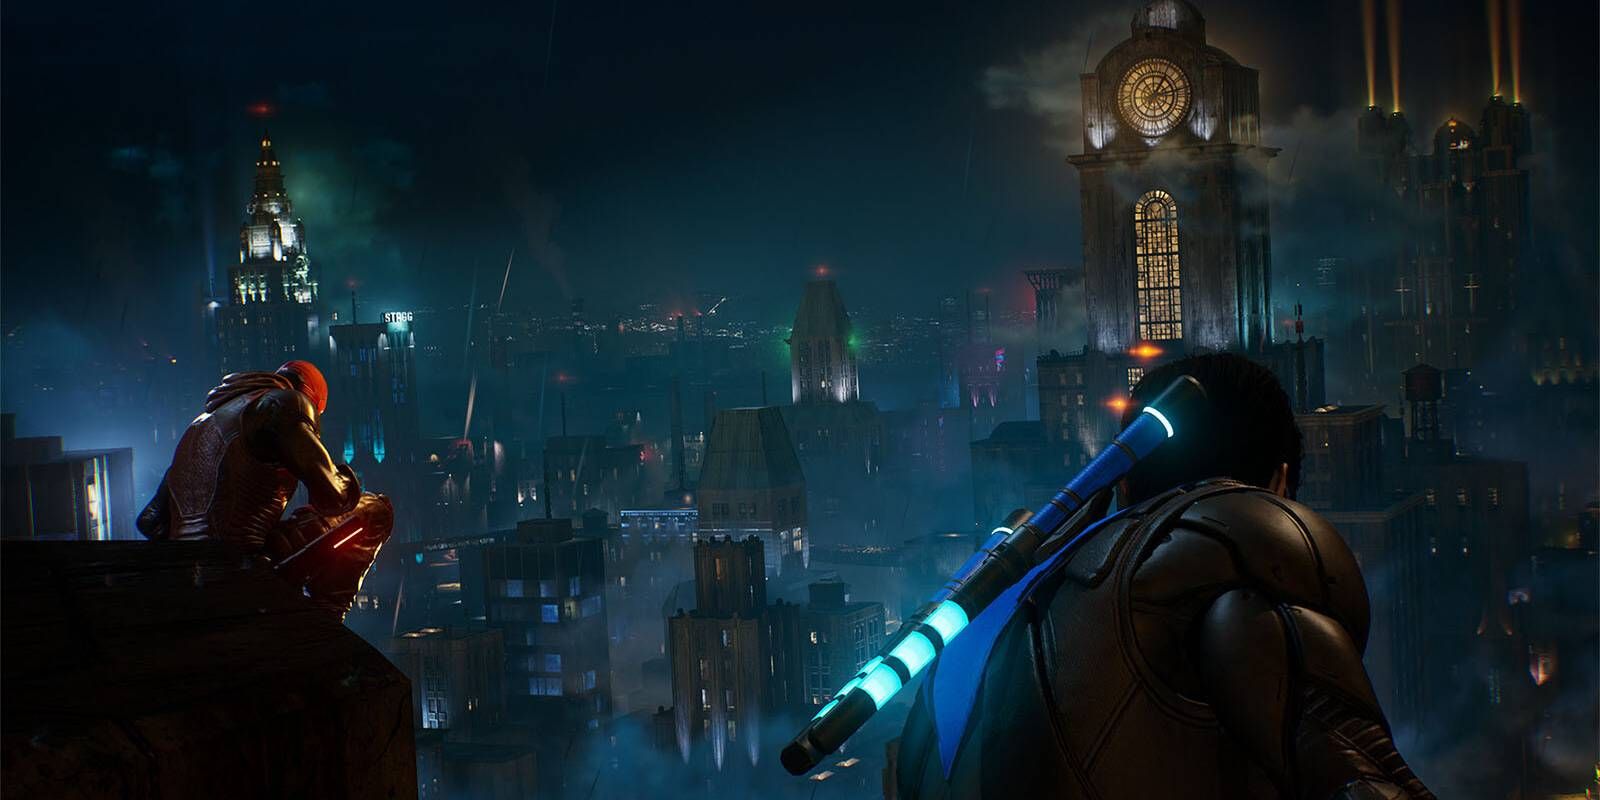 Red Hood and Nightwing perched atop a Gotham City building in Gotham Knights.